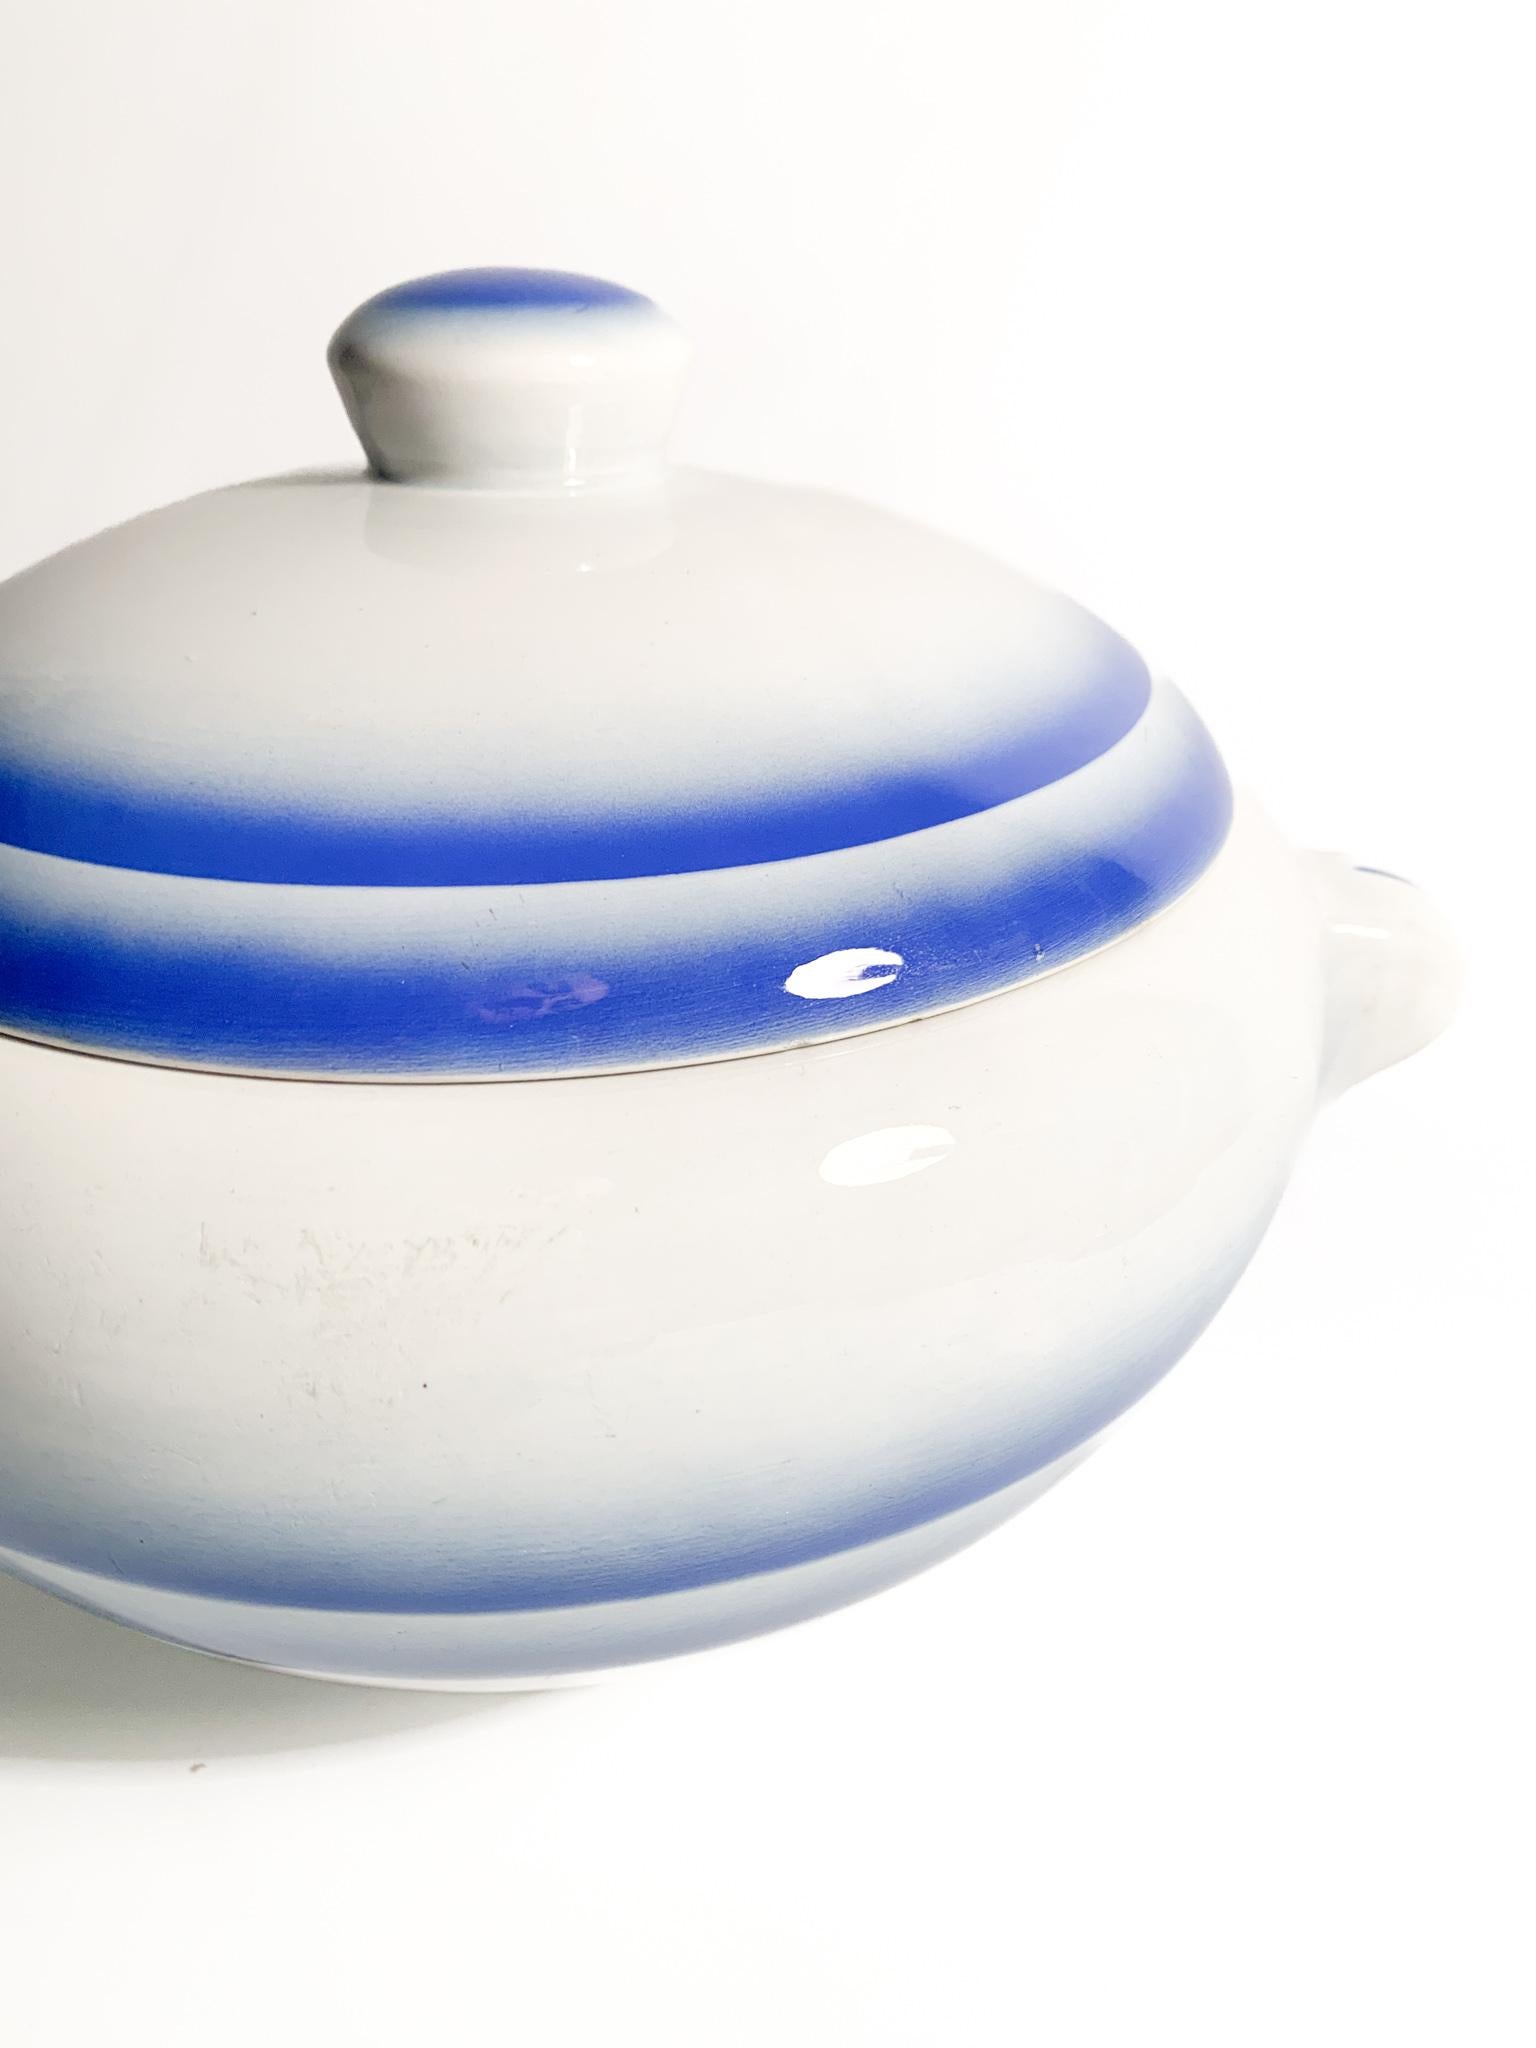 White and Blue Ceramic Centerpiece Tureen by Galvani Pordenone from the 1950s For Sale 3